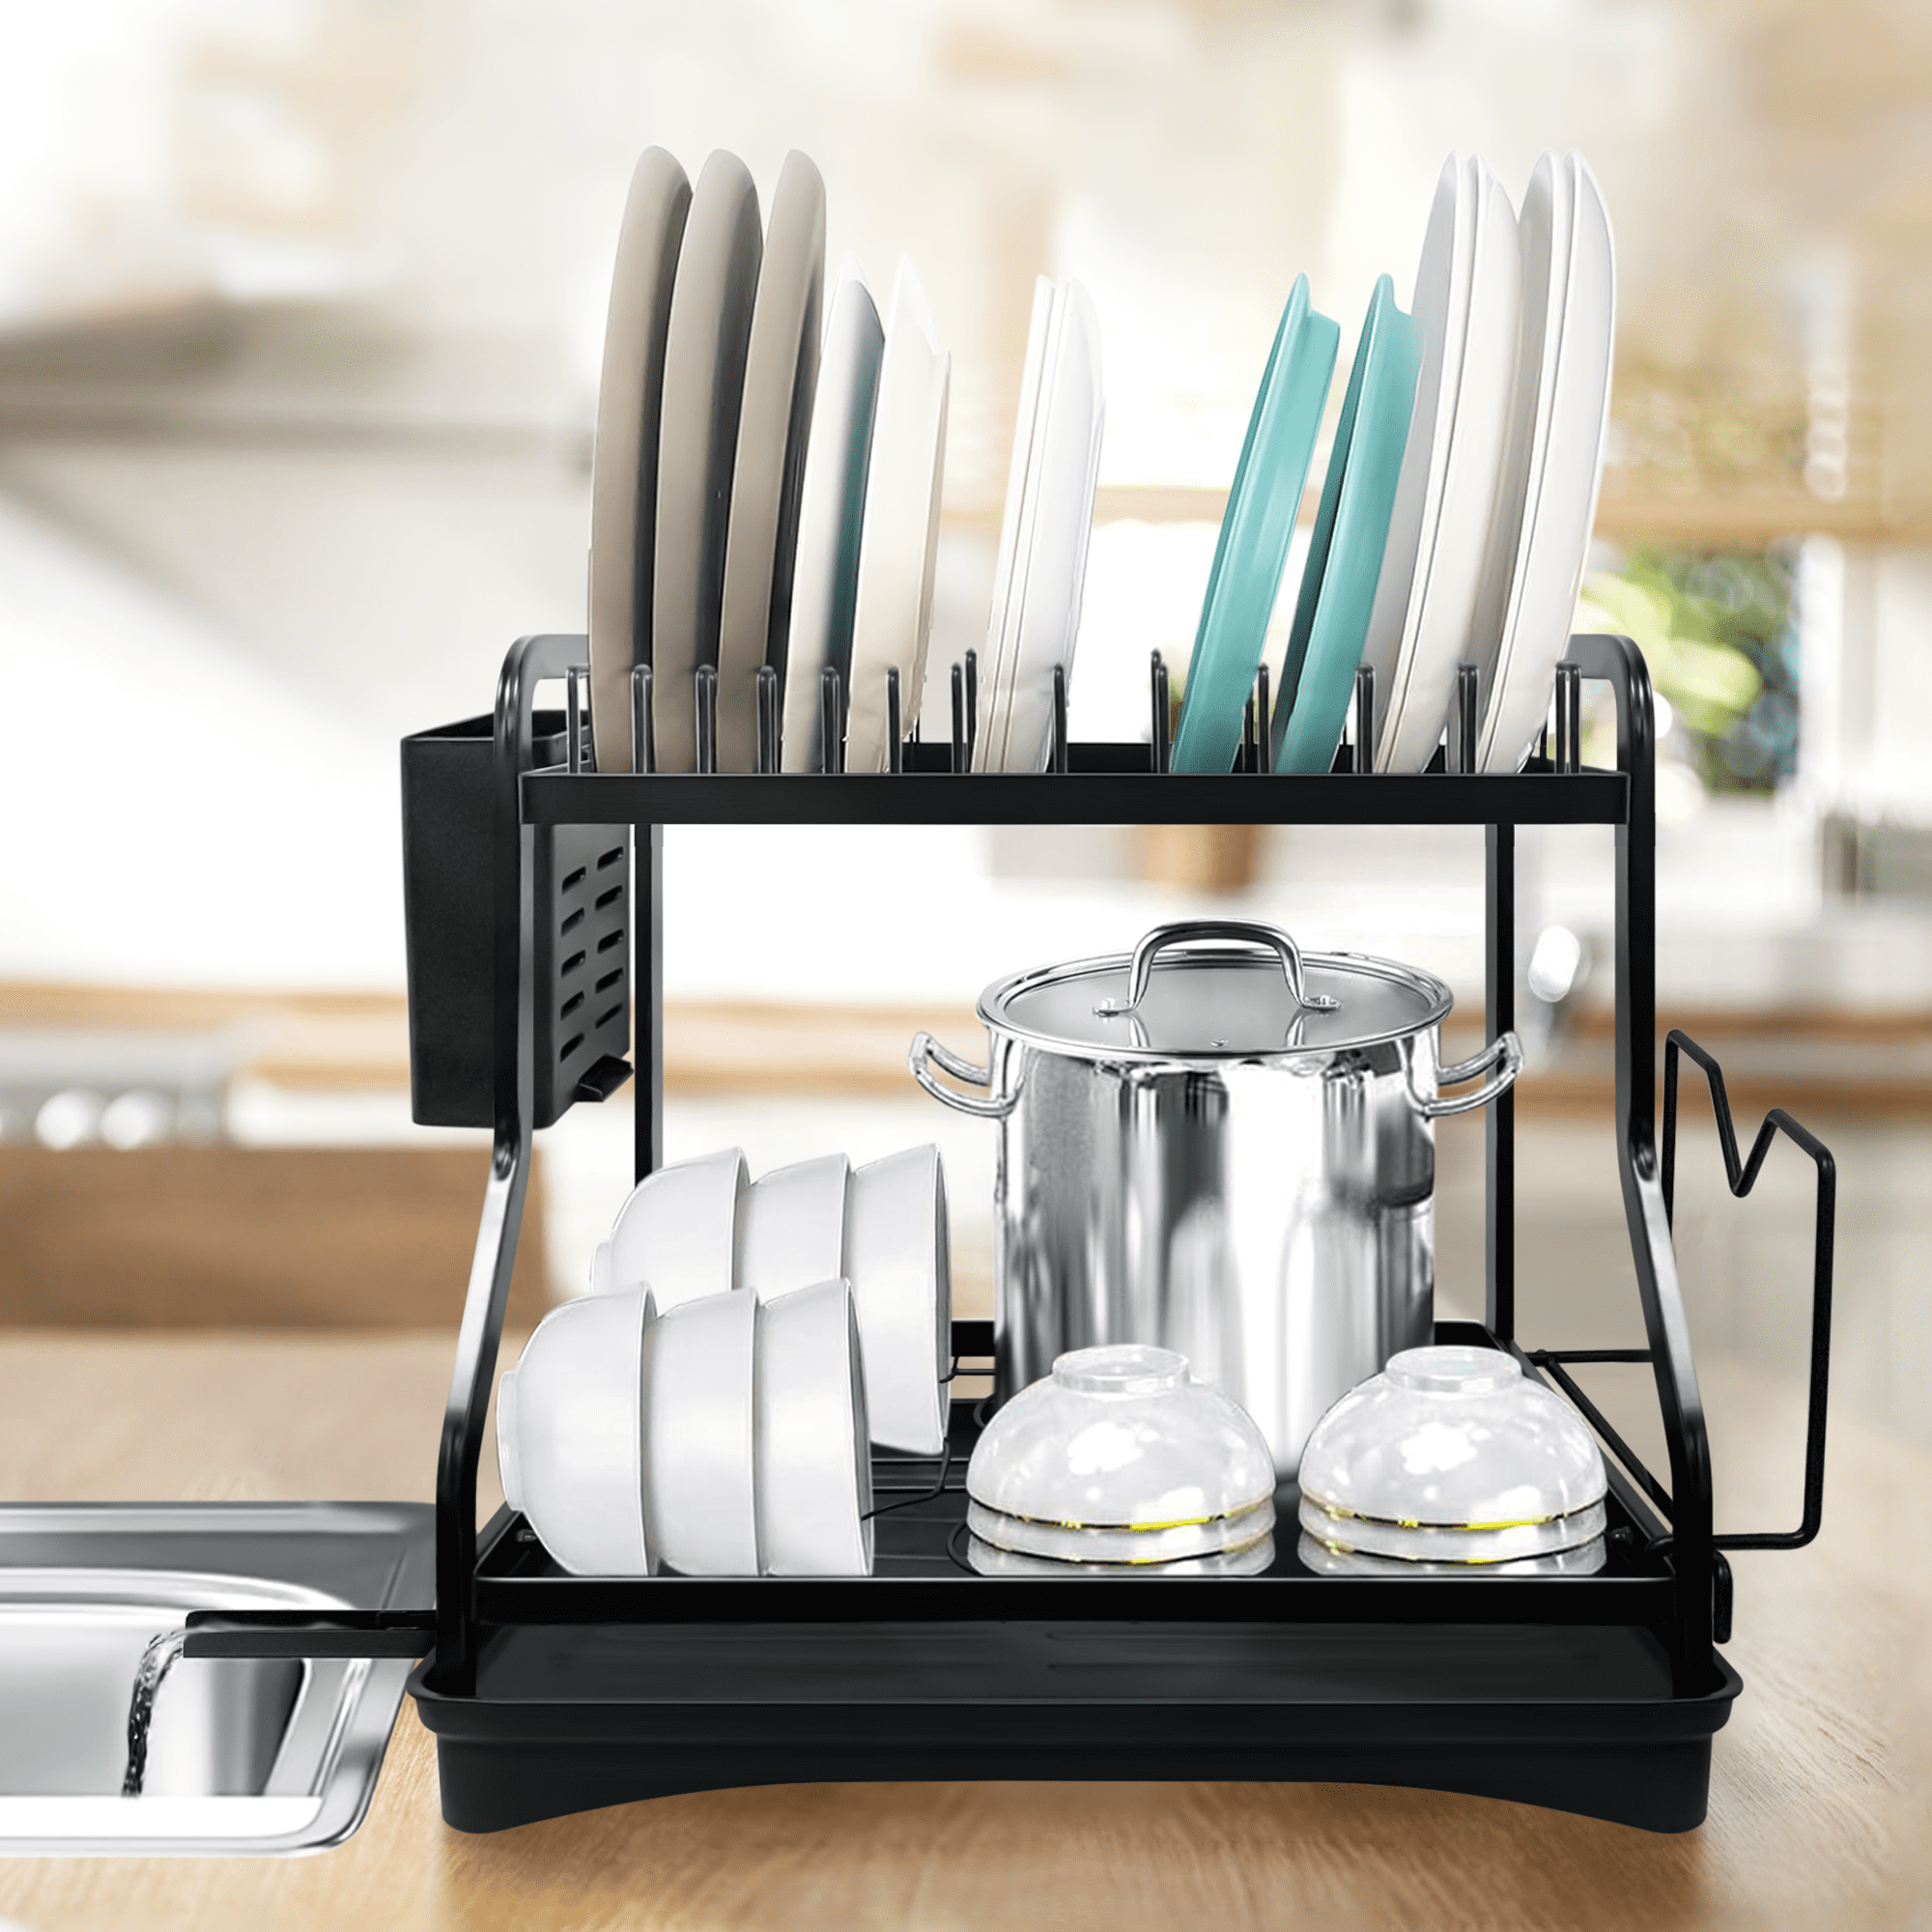  Dish Drying Rack, Aluminum 2-tier Multifunctional 7-in-1 Dish  Racks for Kitchen Counter with Drainboard, Rustproof Detachable Large  Capacity Dish Drainer with Wine Glass Holder, Utensil&knife Holder